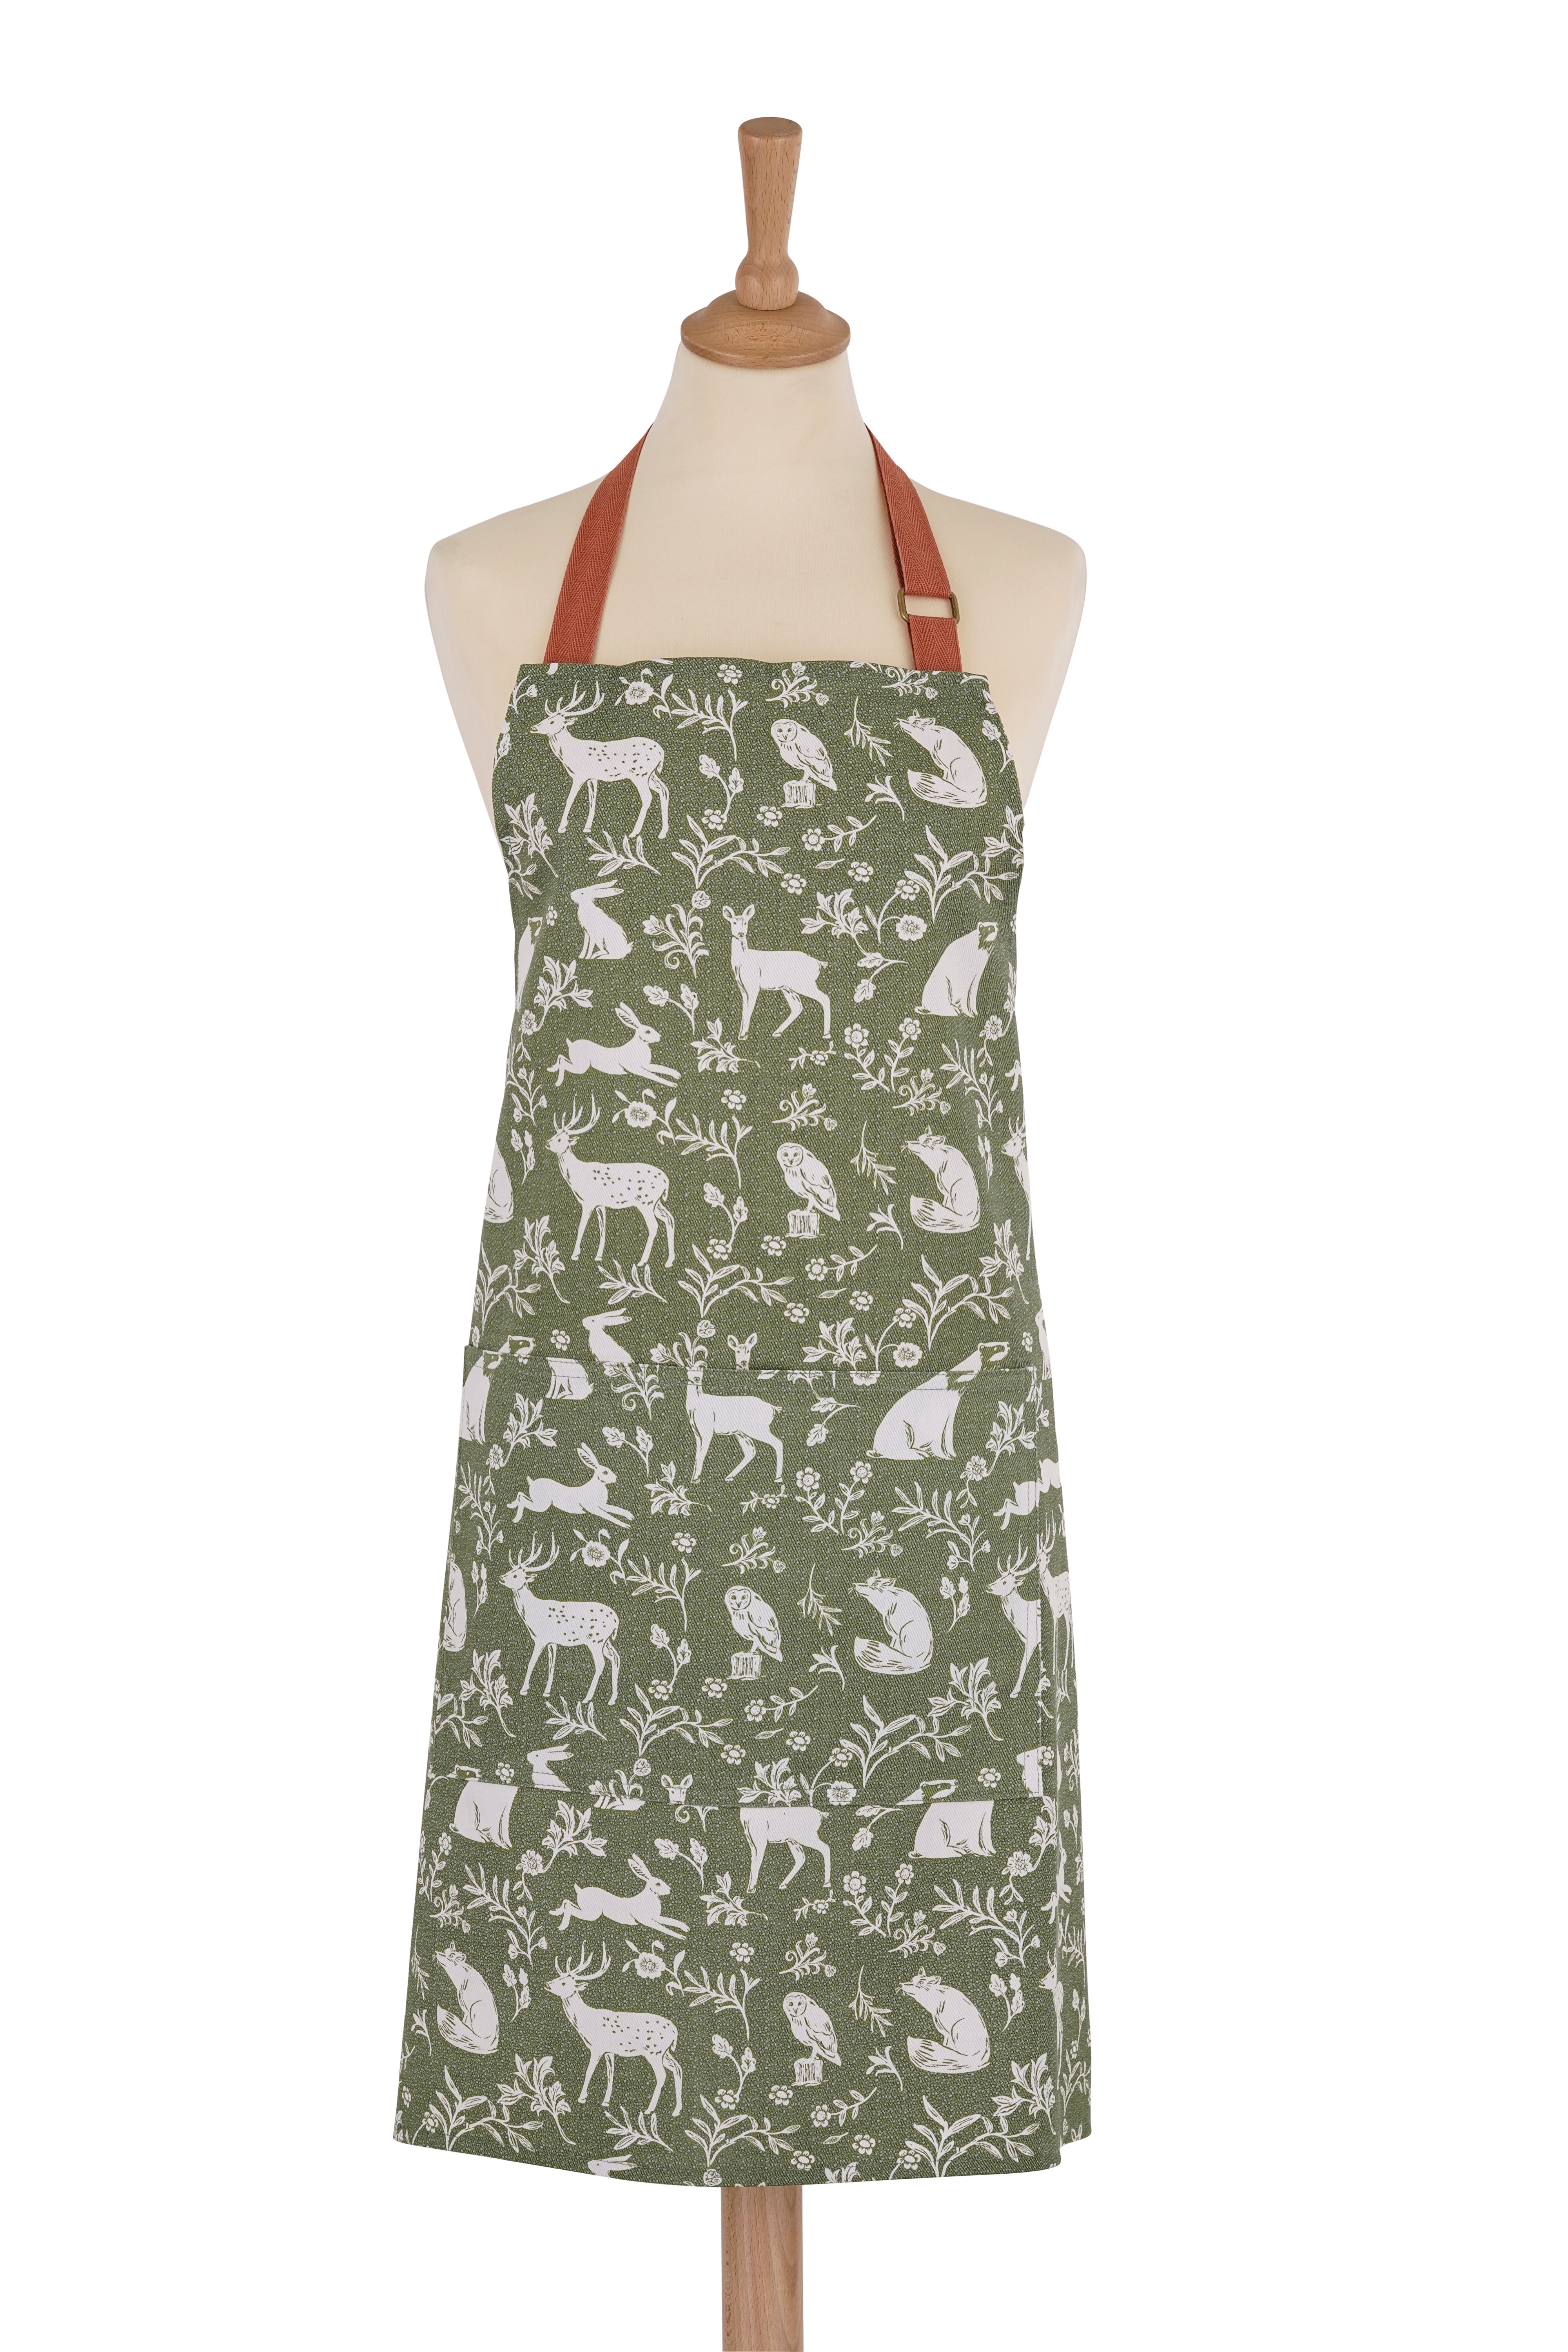 Ulster Weavers Cotton Apron Forest Friends Sage